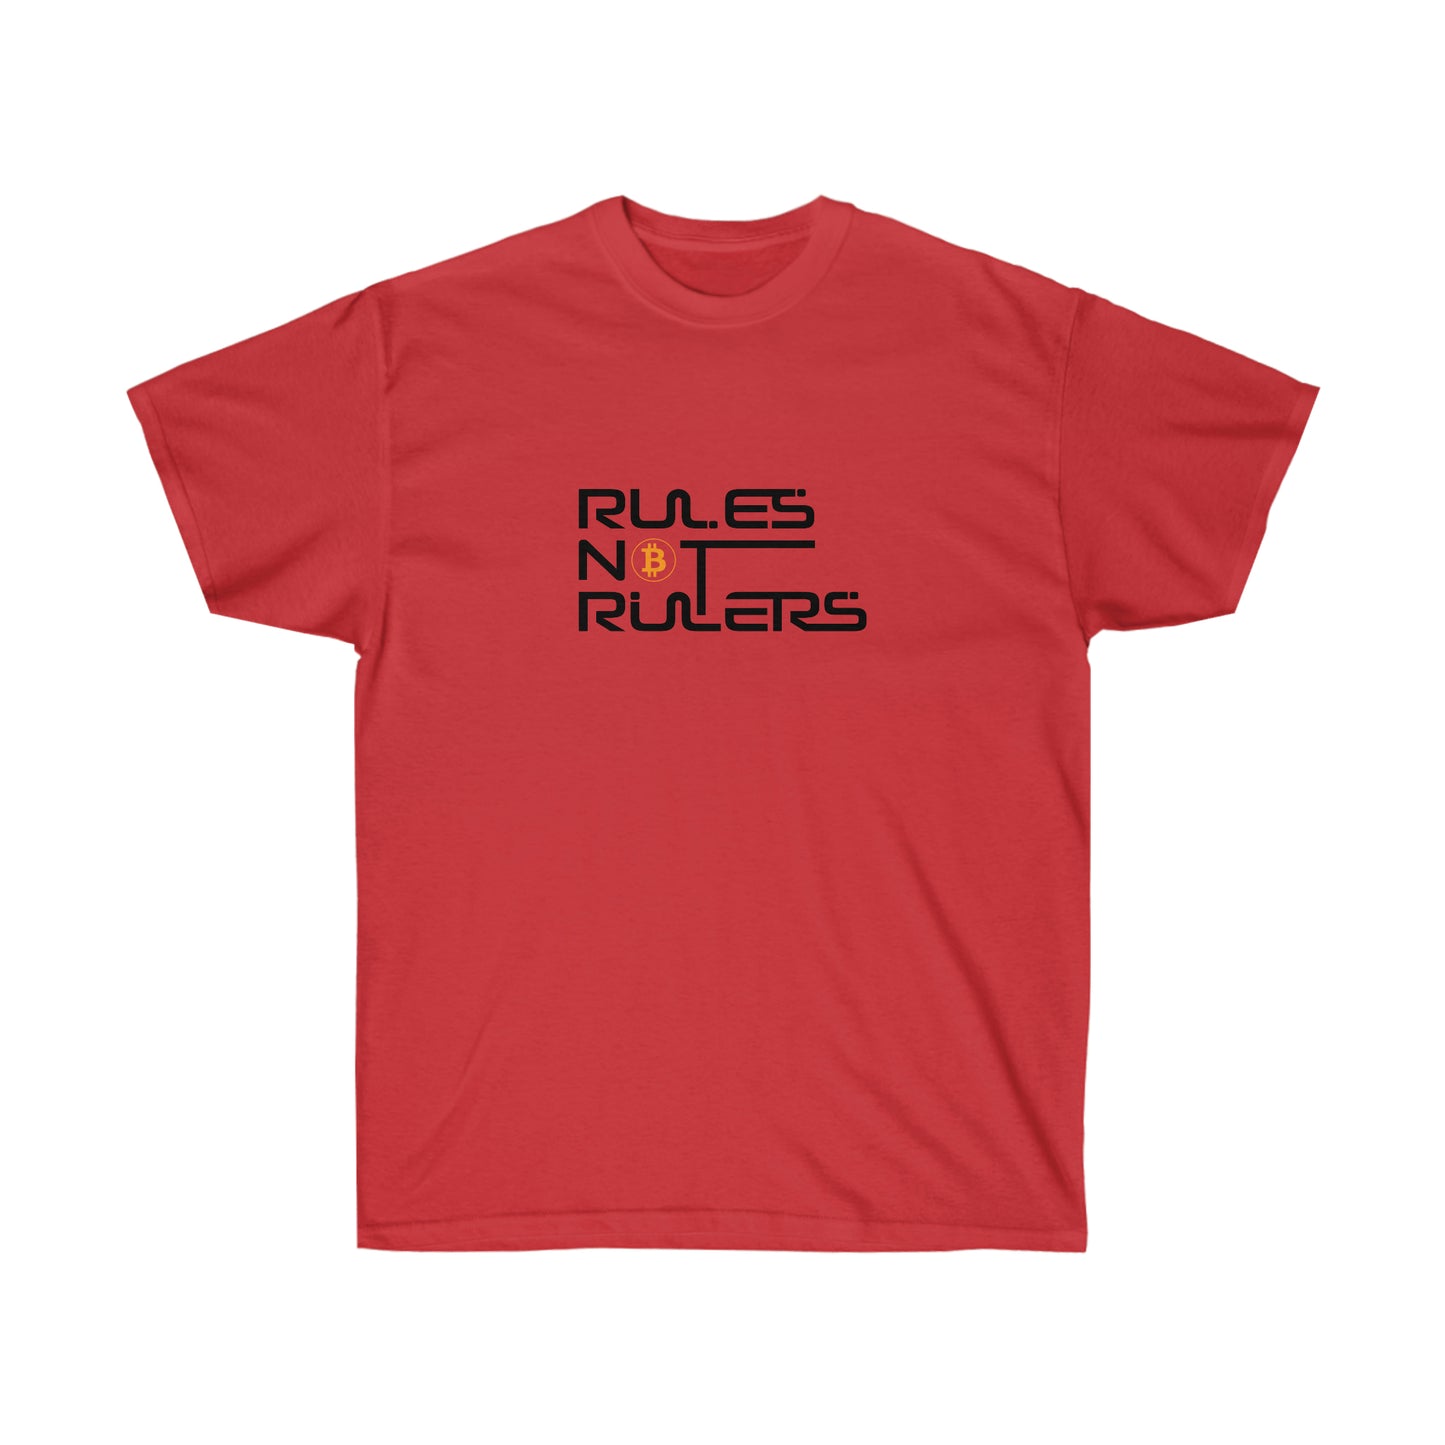 Rules not Rulers Ultra Cotton Tee